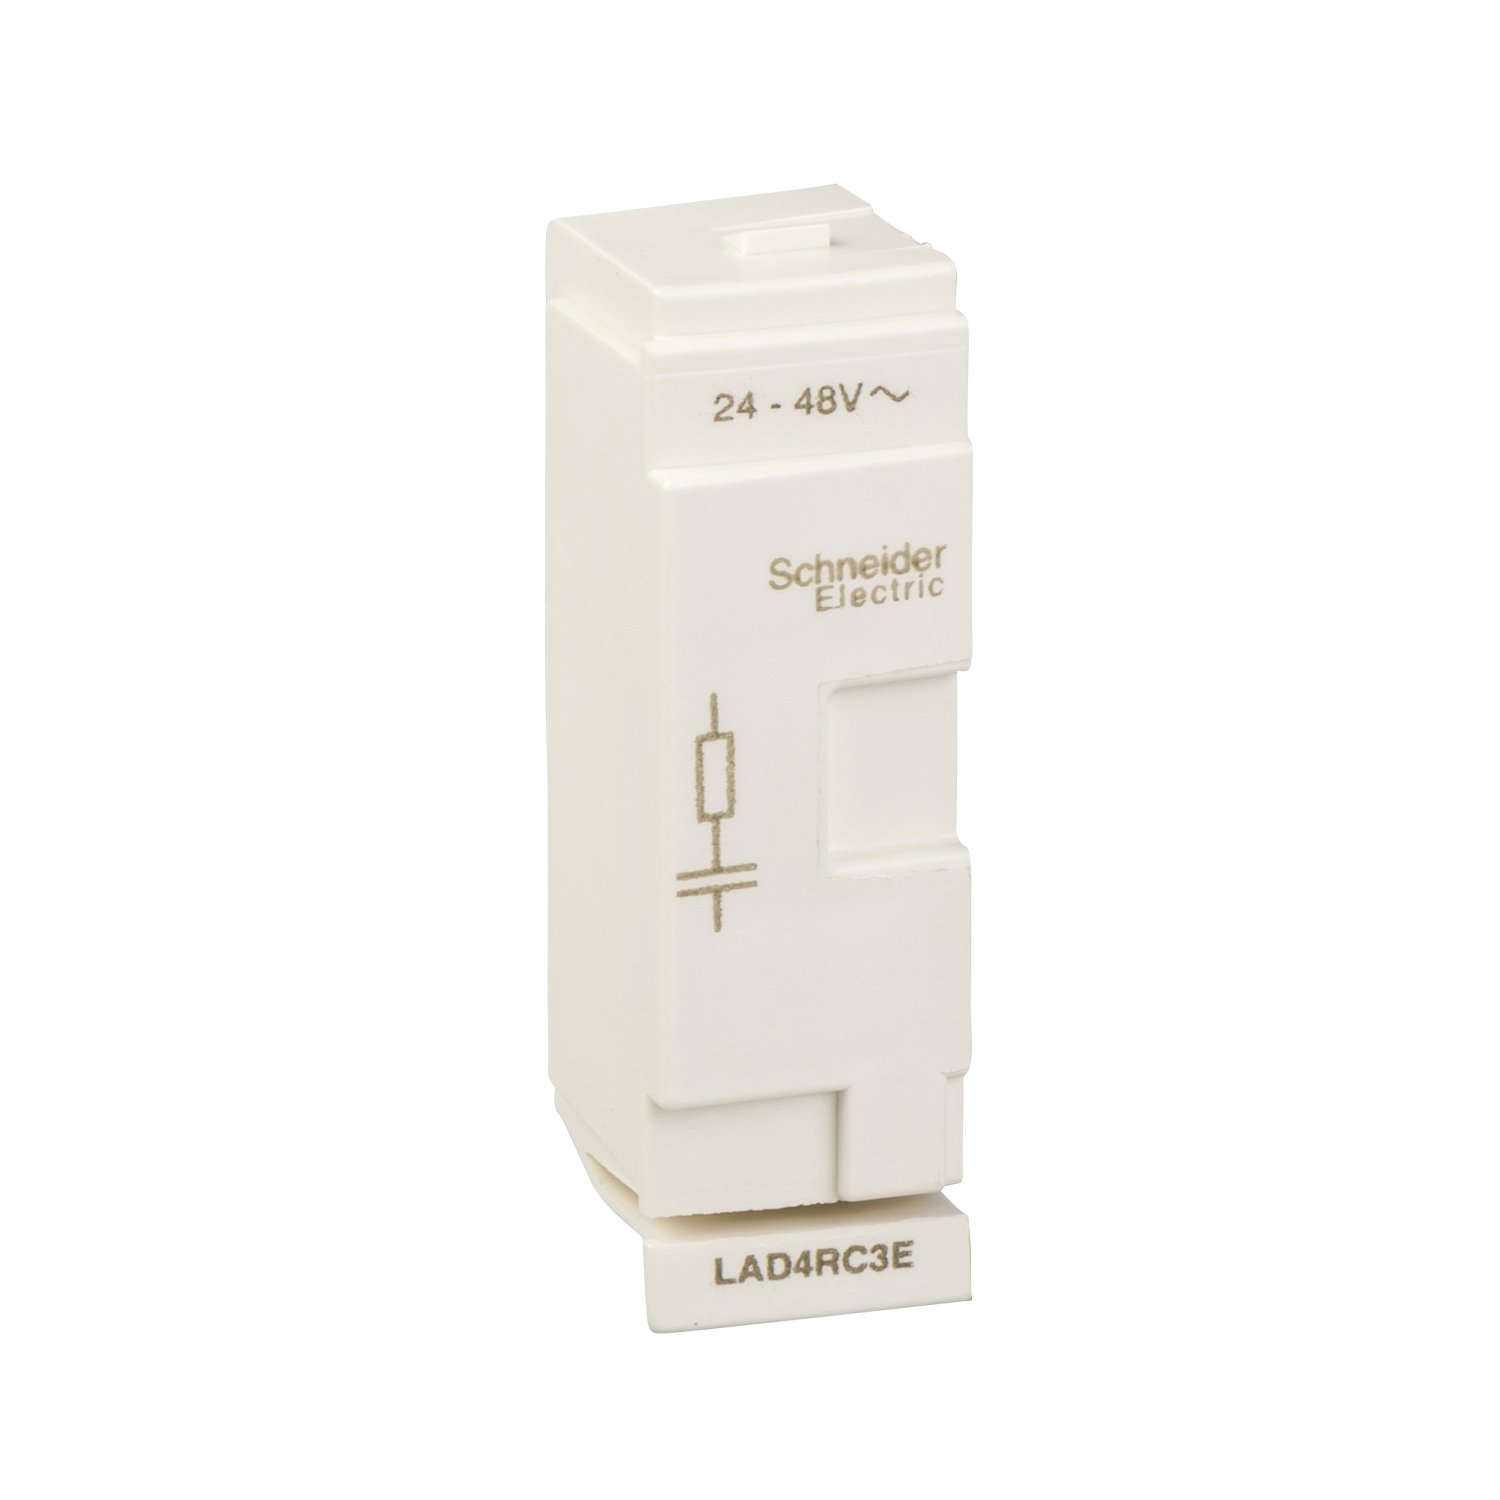 Fitro RC Schneider-electric Tesys LAD4RC       SCHNEIDER ELECTRIC      LAD4RC3U